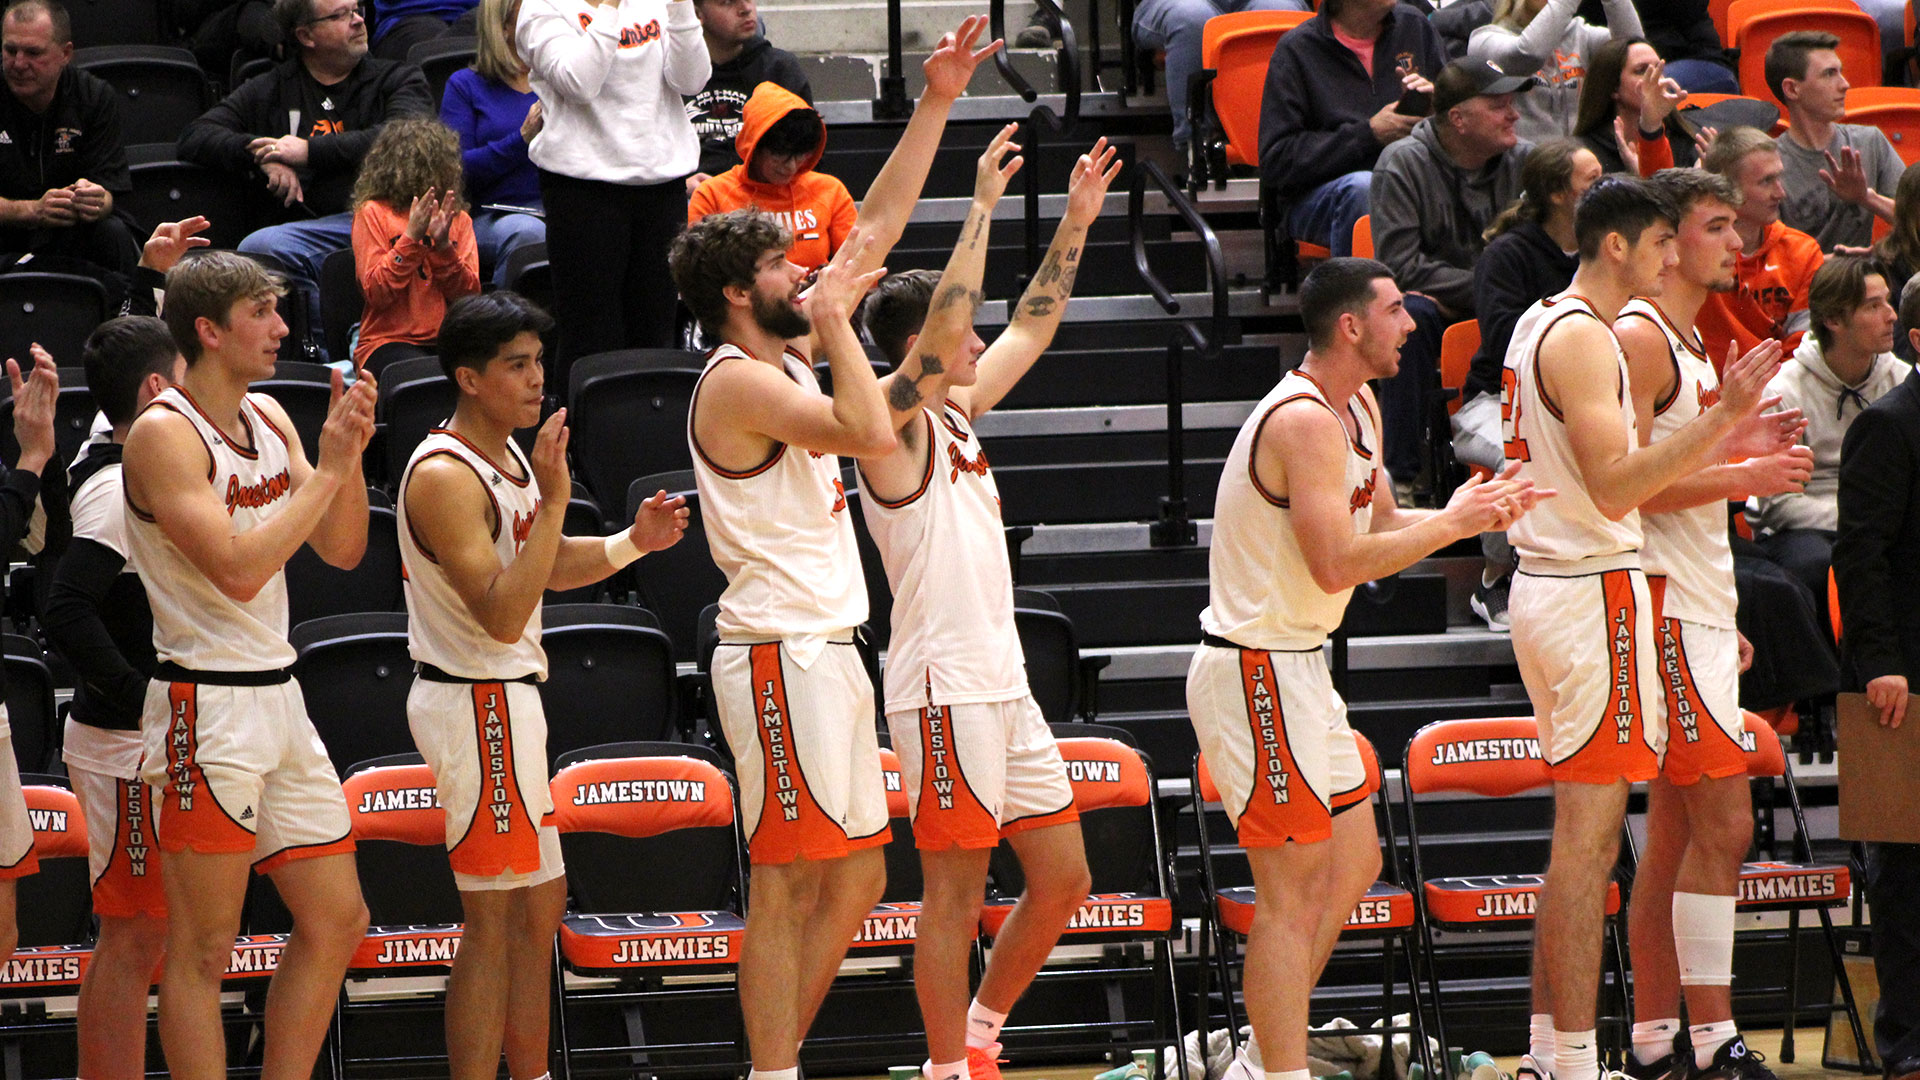 No. 9 Jimmies stay unbeaten with win at VCSU